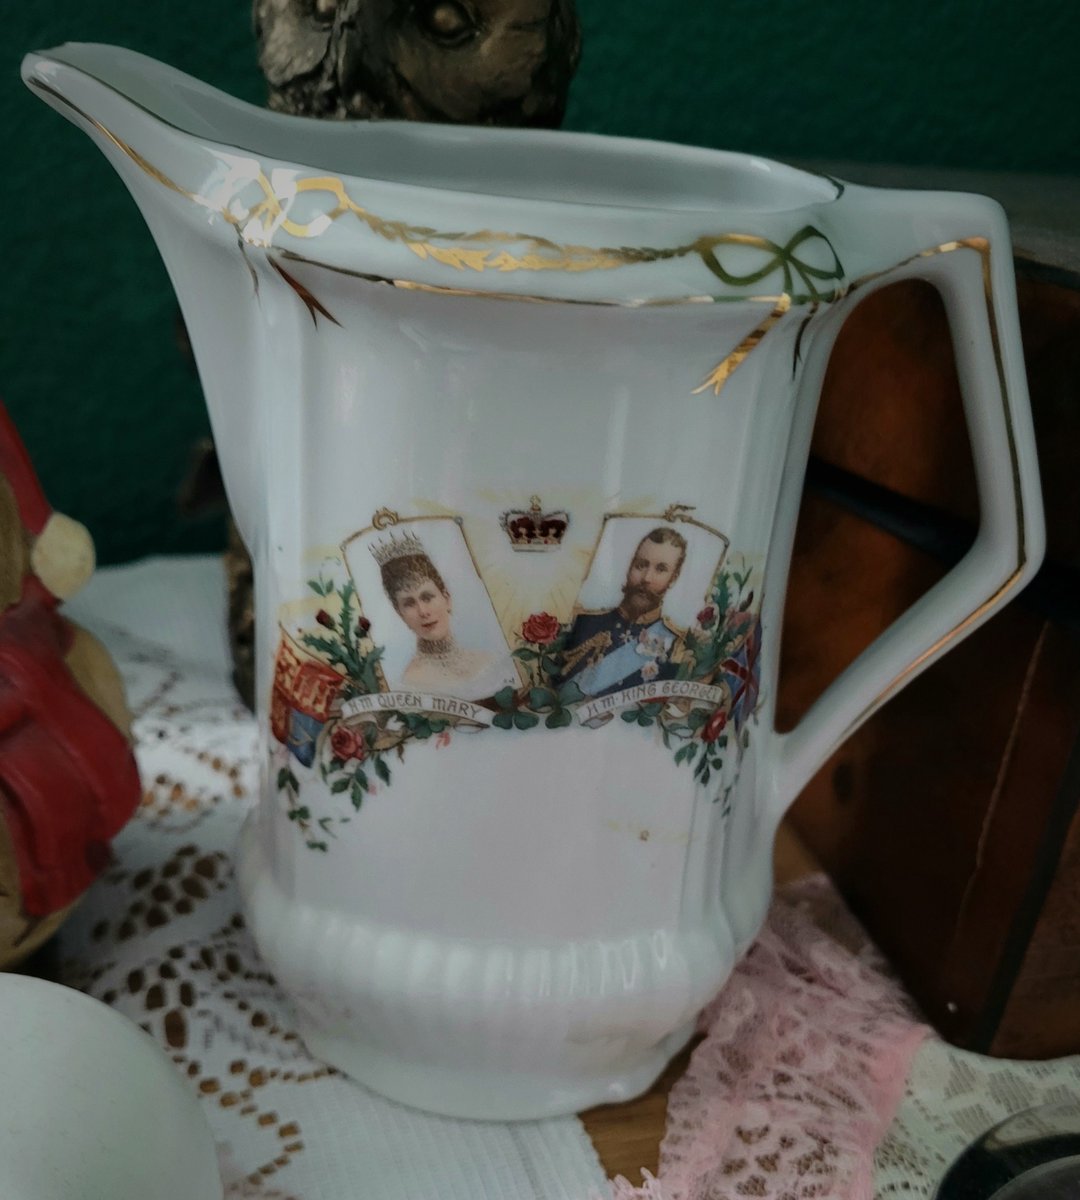 Lovely  coronation jug of King George V and Queen Mary  from 1911, another antique find from Sue Ryder charity shop in Didsbury. 

#Didsbury #antique #coronation